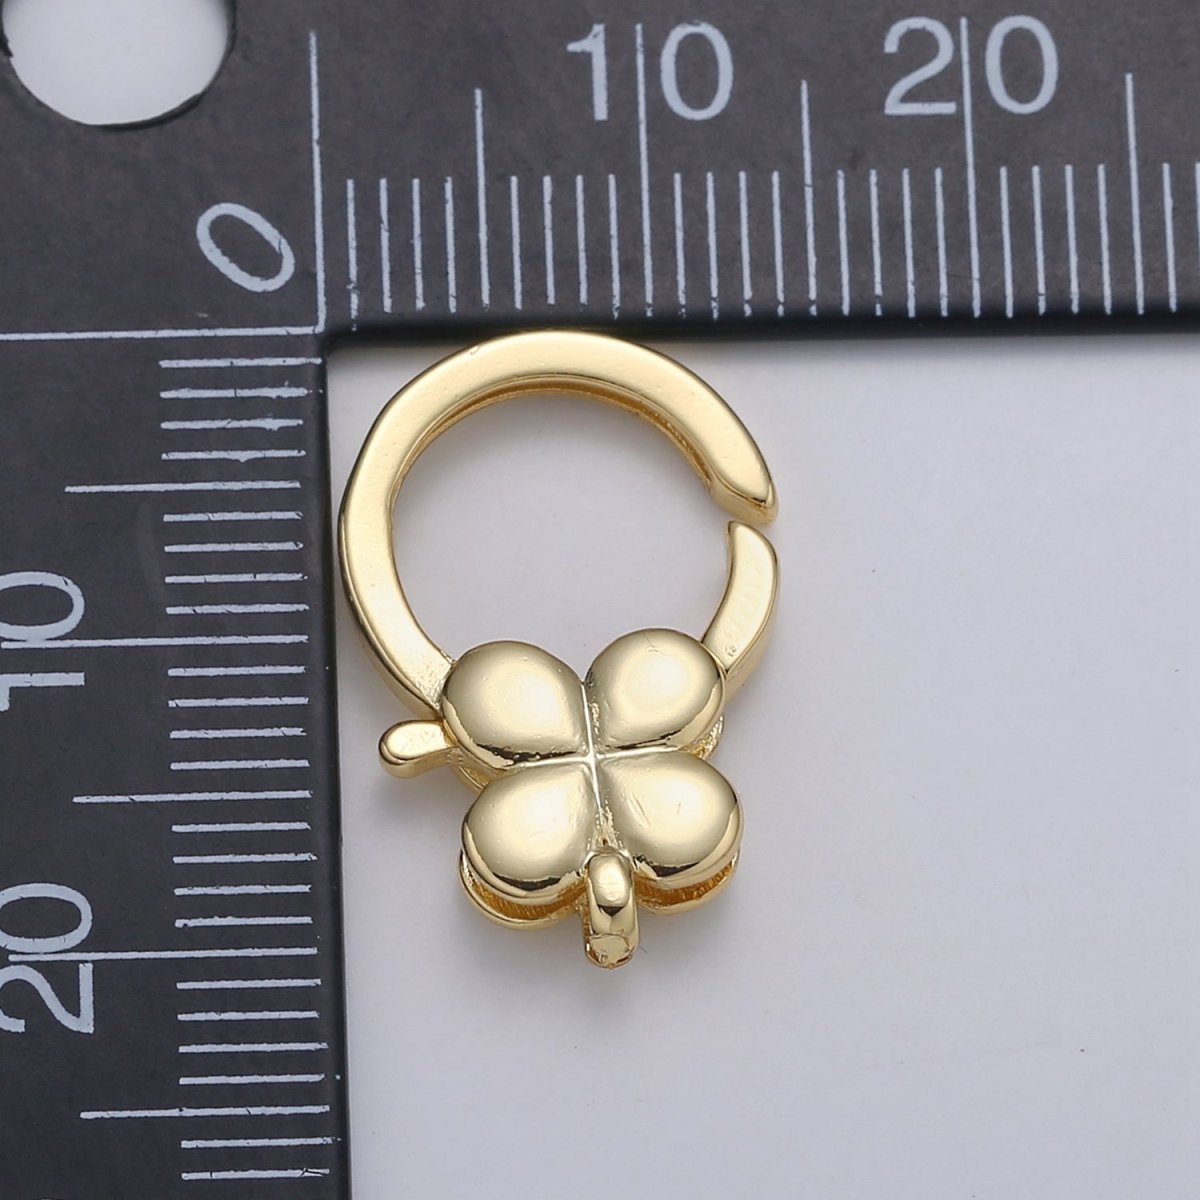 24K Gold Filled Four Clover Lobster Clasp Push Ring Gate Clasp For DIY Jewelry Making L-182 - DLUXCA